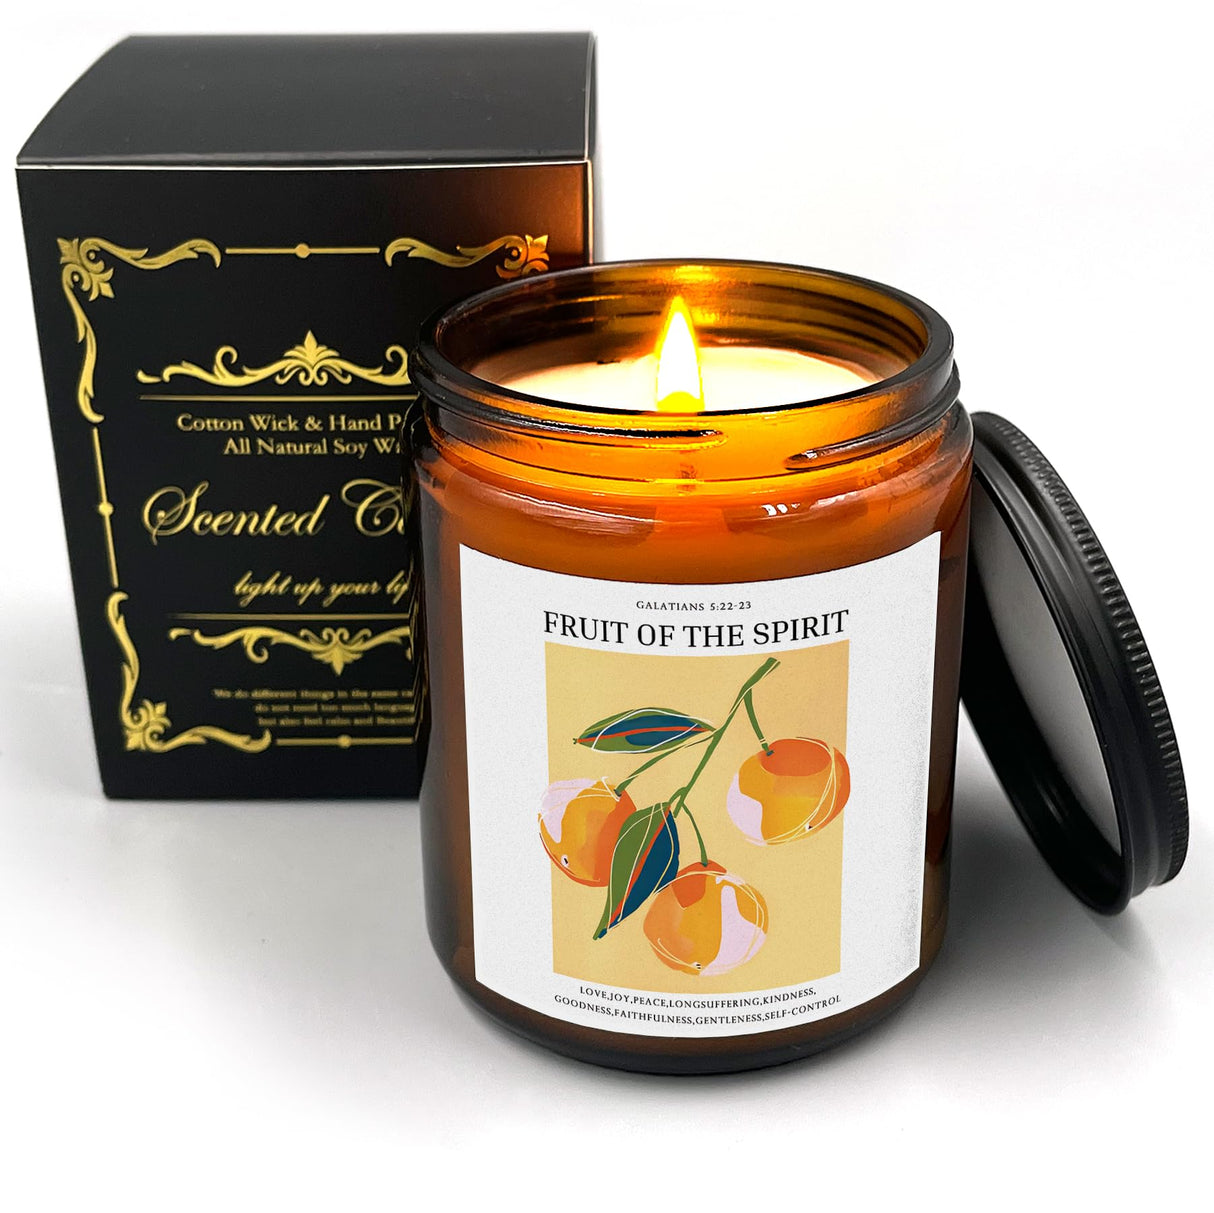 Christian Candles,Christian Candles Gifts for Women,Religious Candles,Fruit of Spirit Candle,Love Joy Peace Kindness Candle,galatians 5：22-23 Candles Cologne Candle 8 oz/40h